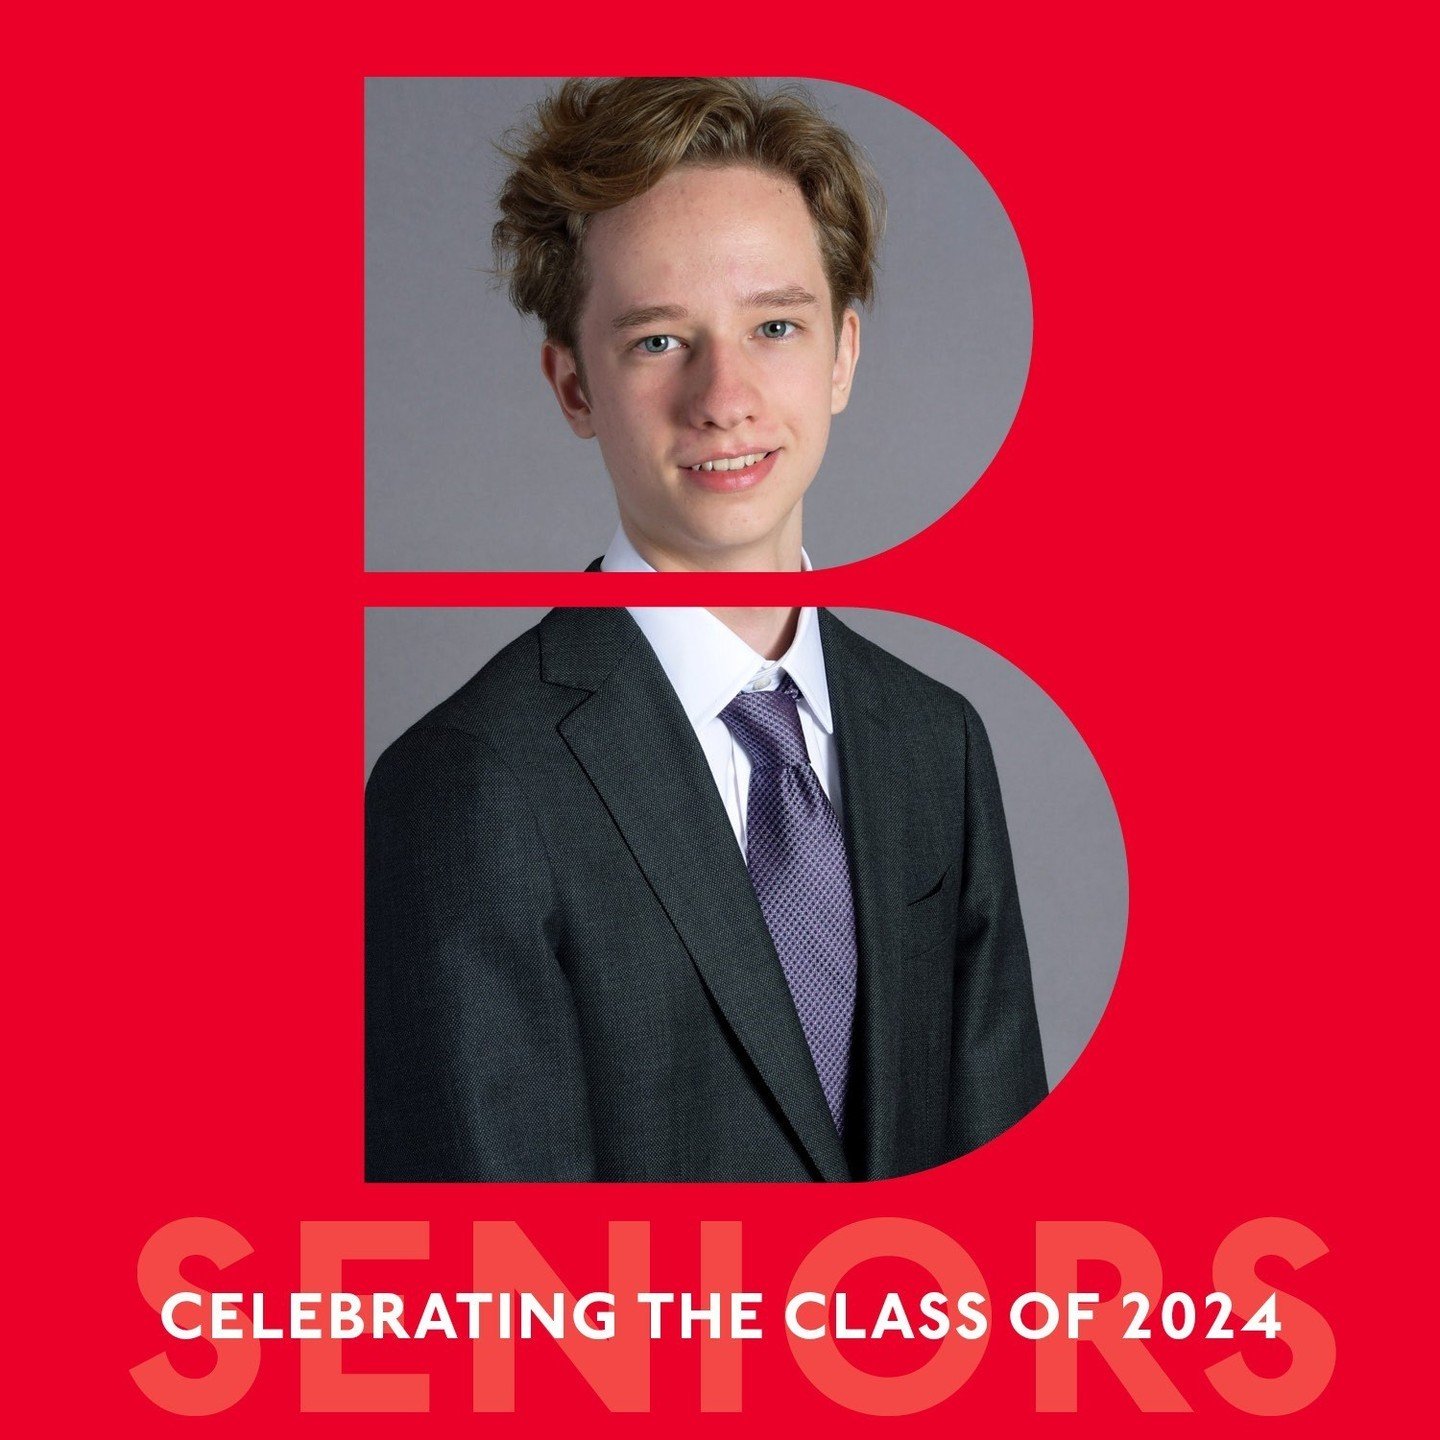 Callan shines with his creativity and problem-solving prowess, adept at navigating vast datasets to unveil hidden patterns and correlations. His analytical skills extend beyond numbers to crafting narratives that reveal profound societal and economic